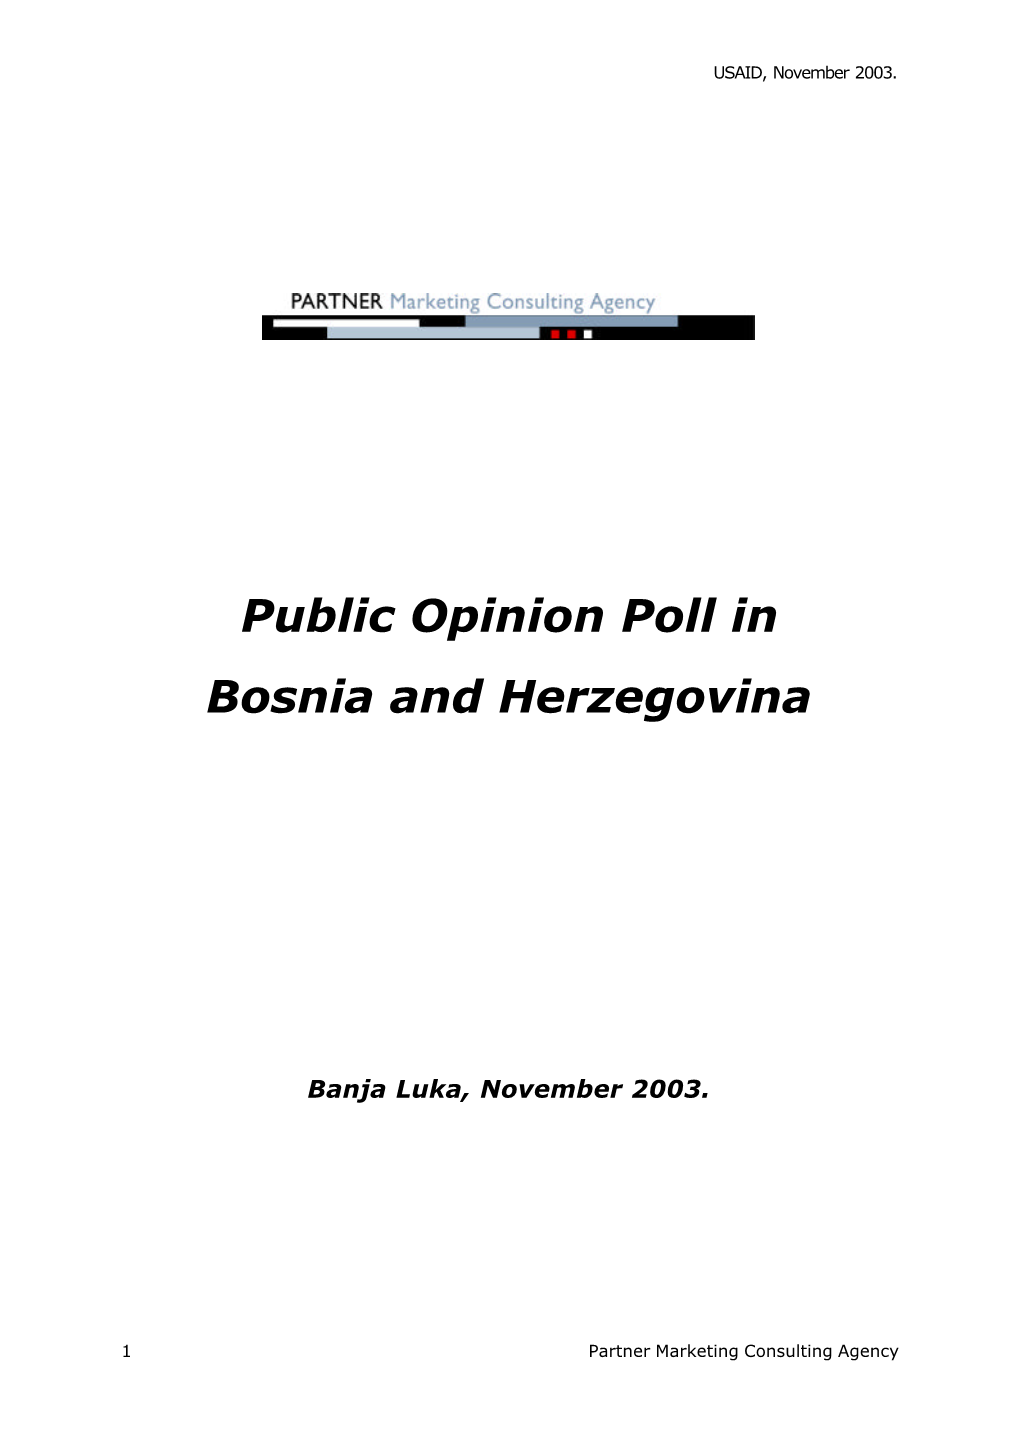 Public Opinion Poll in Bosnia and Herzegovina